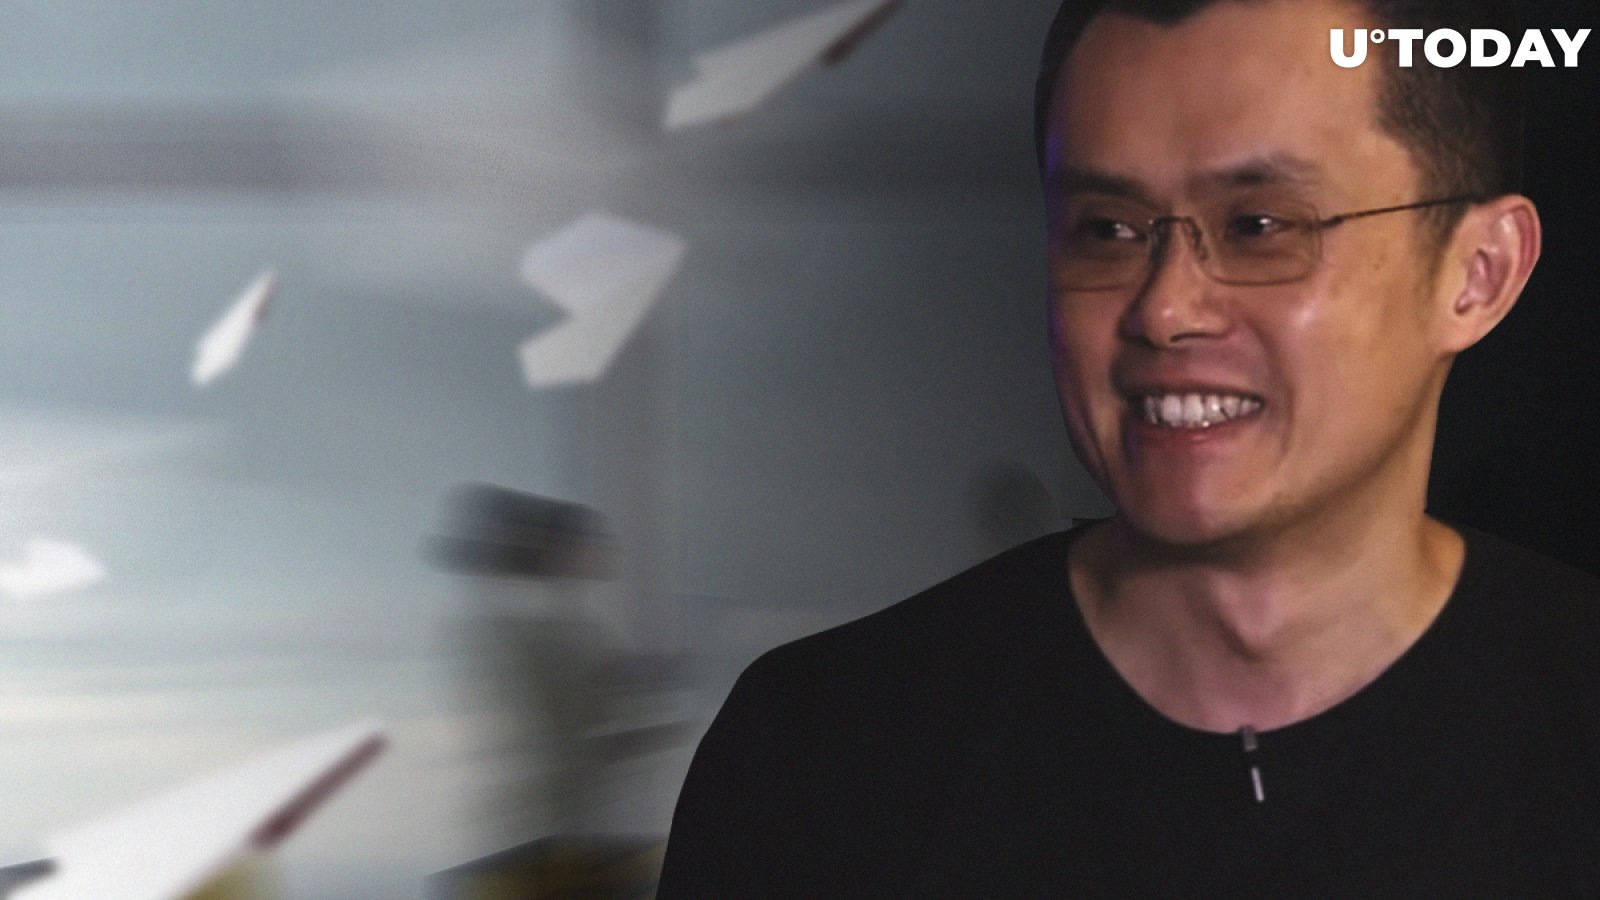 CZ Binance to Reinvest Company's $1 Bln Cumulative Profit Rejecting Idea of Buying Lambo